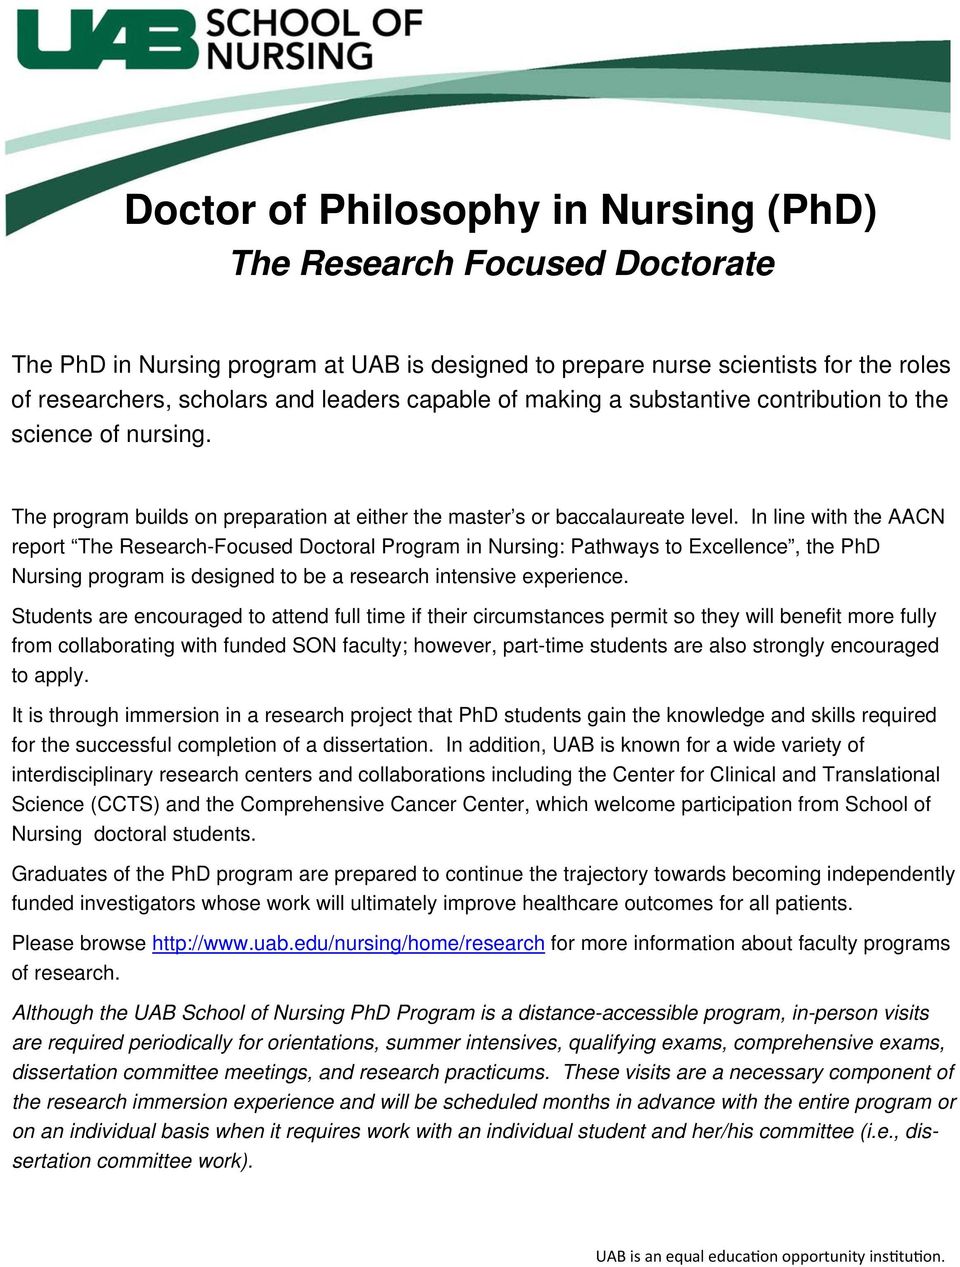 In line with the AACN report The Research-Focused Doctoral Program in Nursing: Pathways to Excellence, the PhD Nursing program is designed to be a research intensive experience.